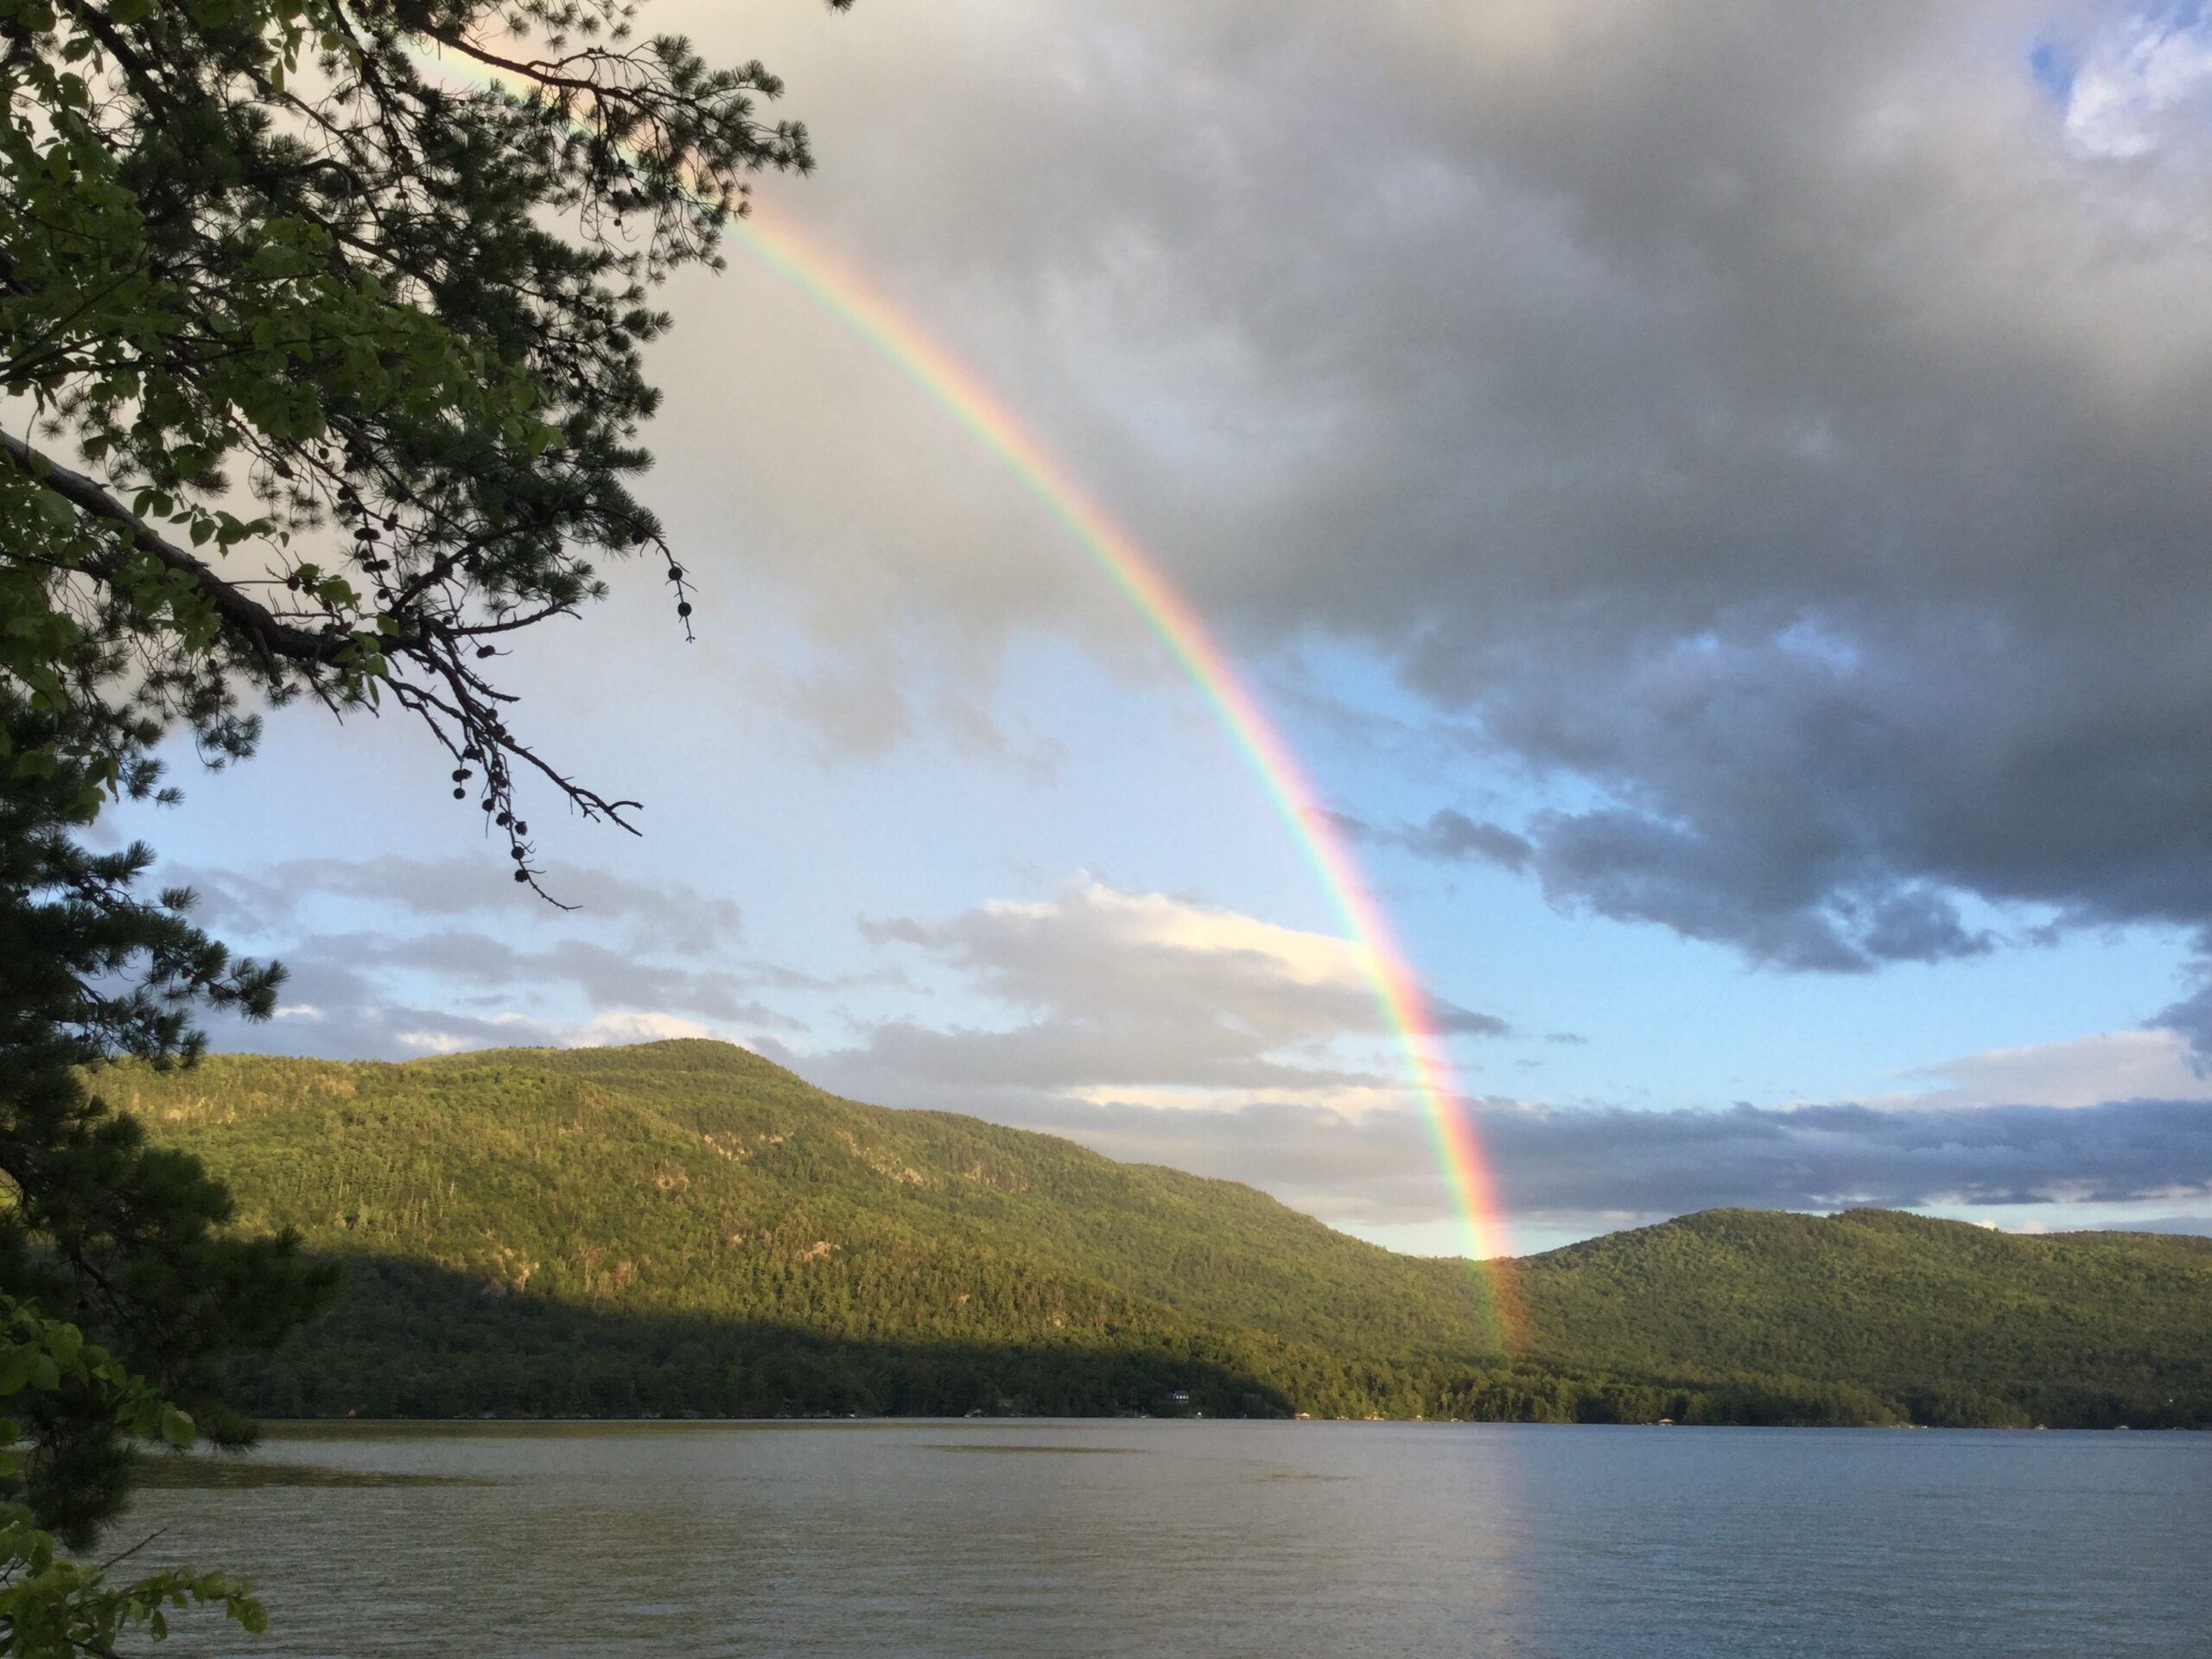 A rainbow can seen over a lake with lush green mountains in the background.